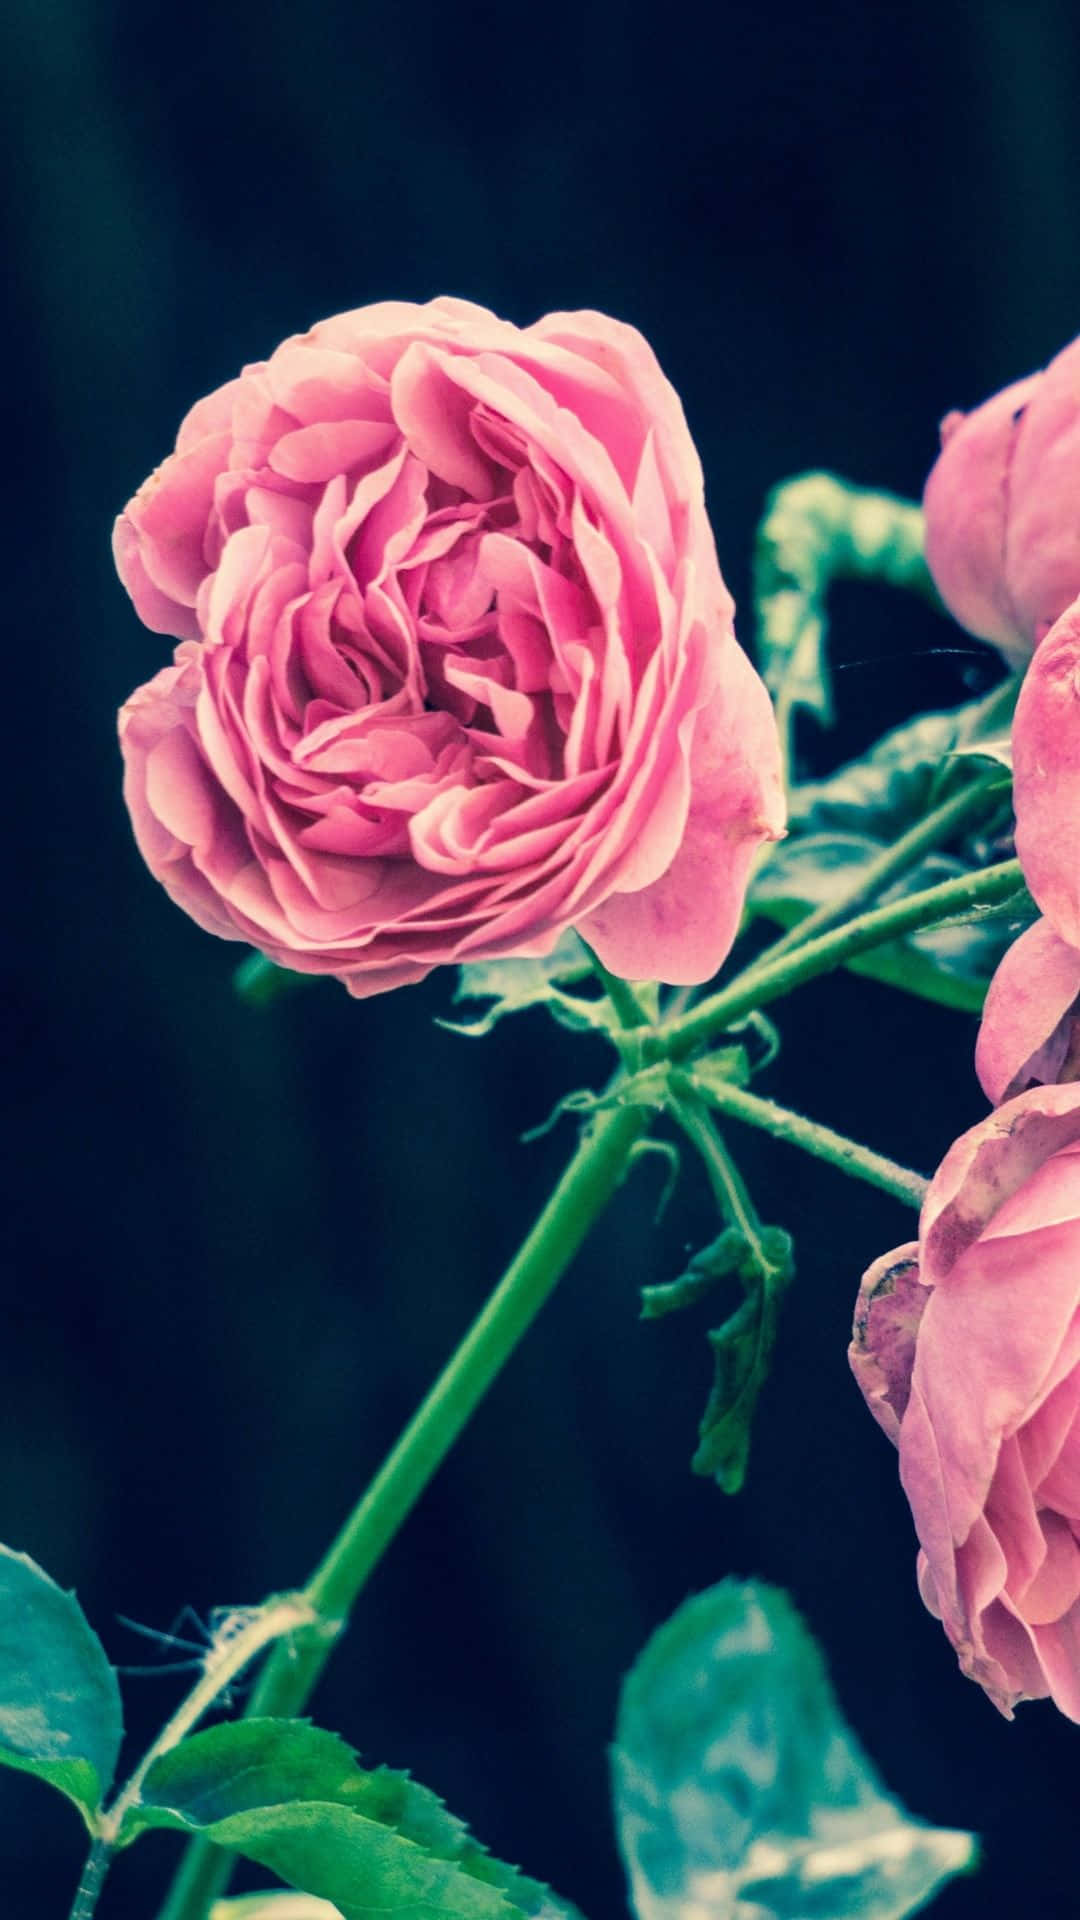 Upgrade your phone to give it a fresh, bright look with this Flower iPhone wallpaper